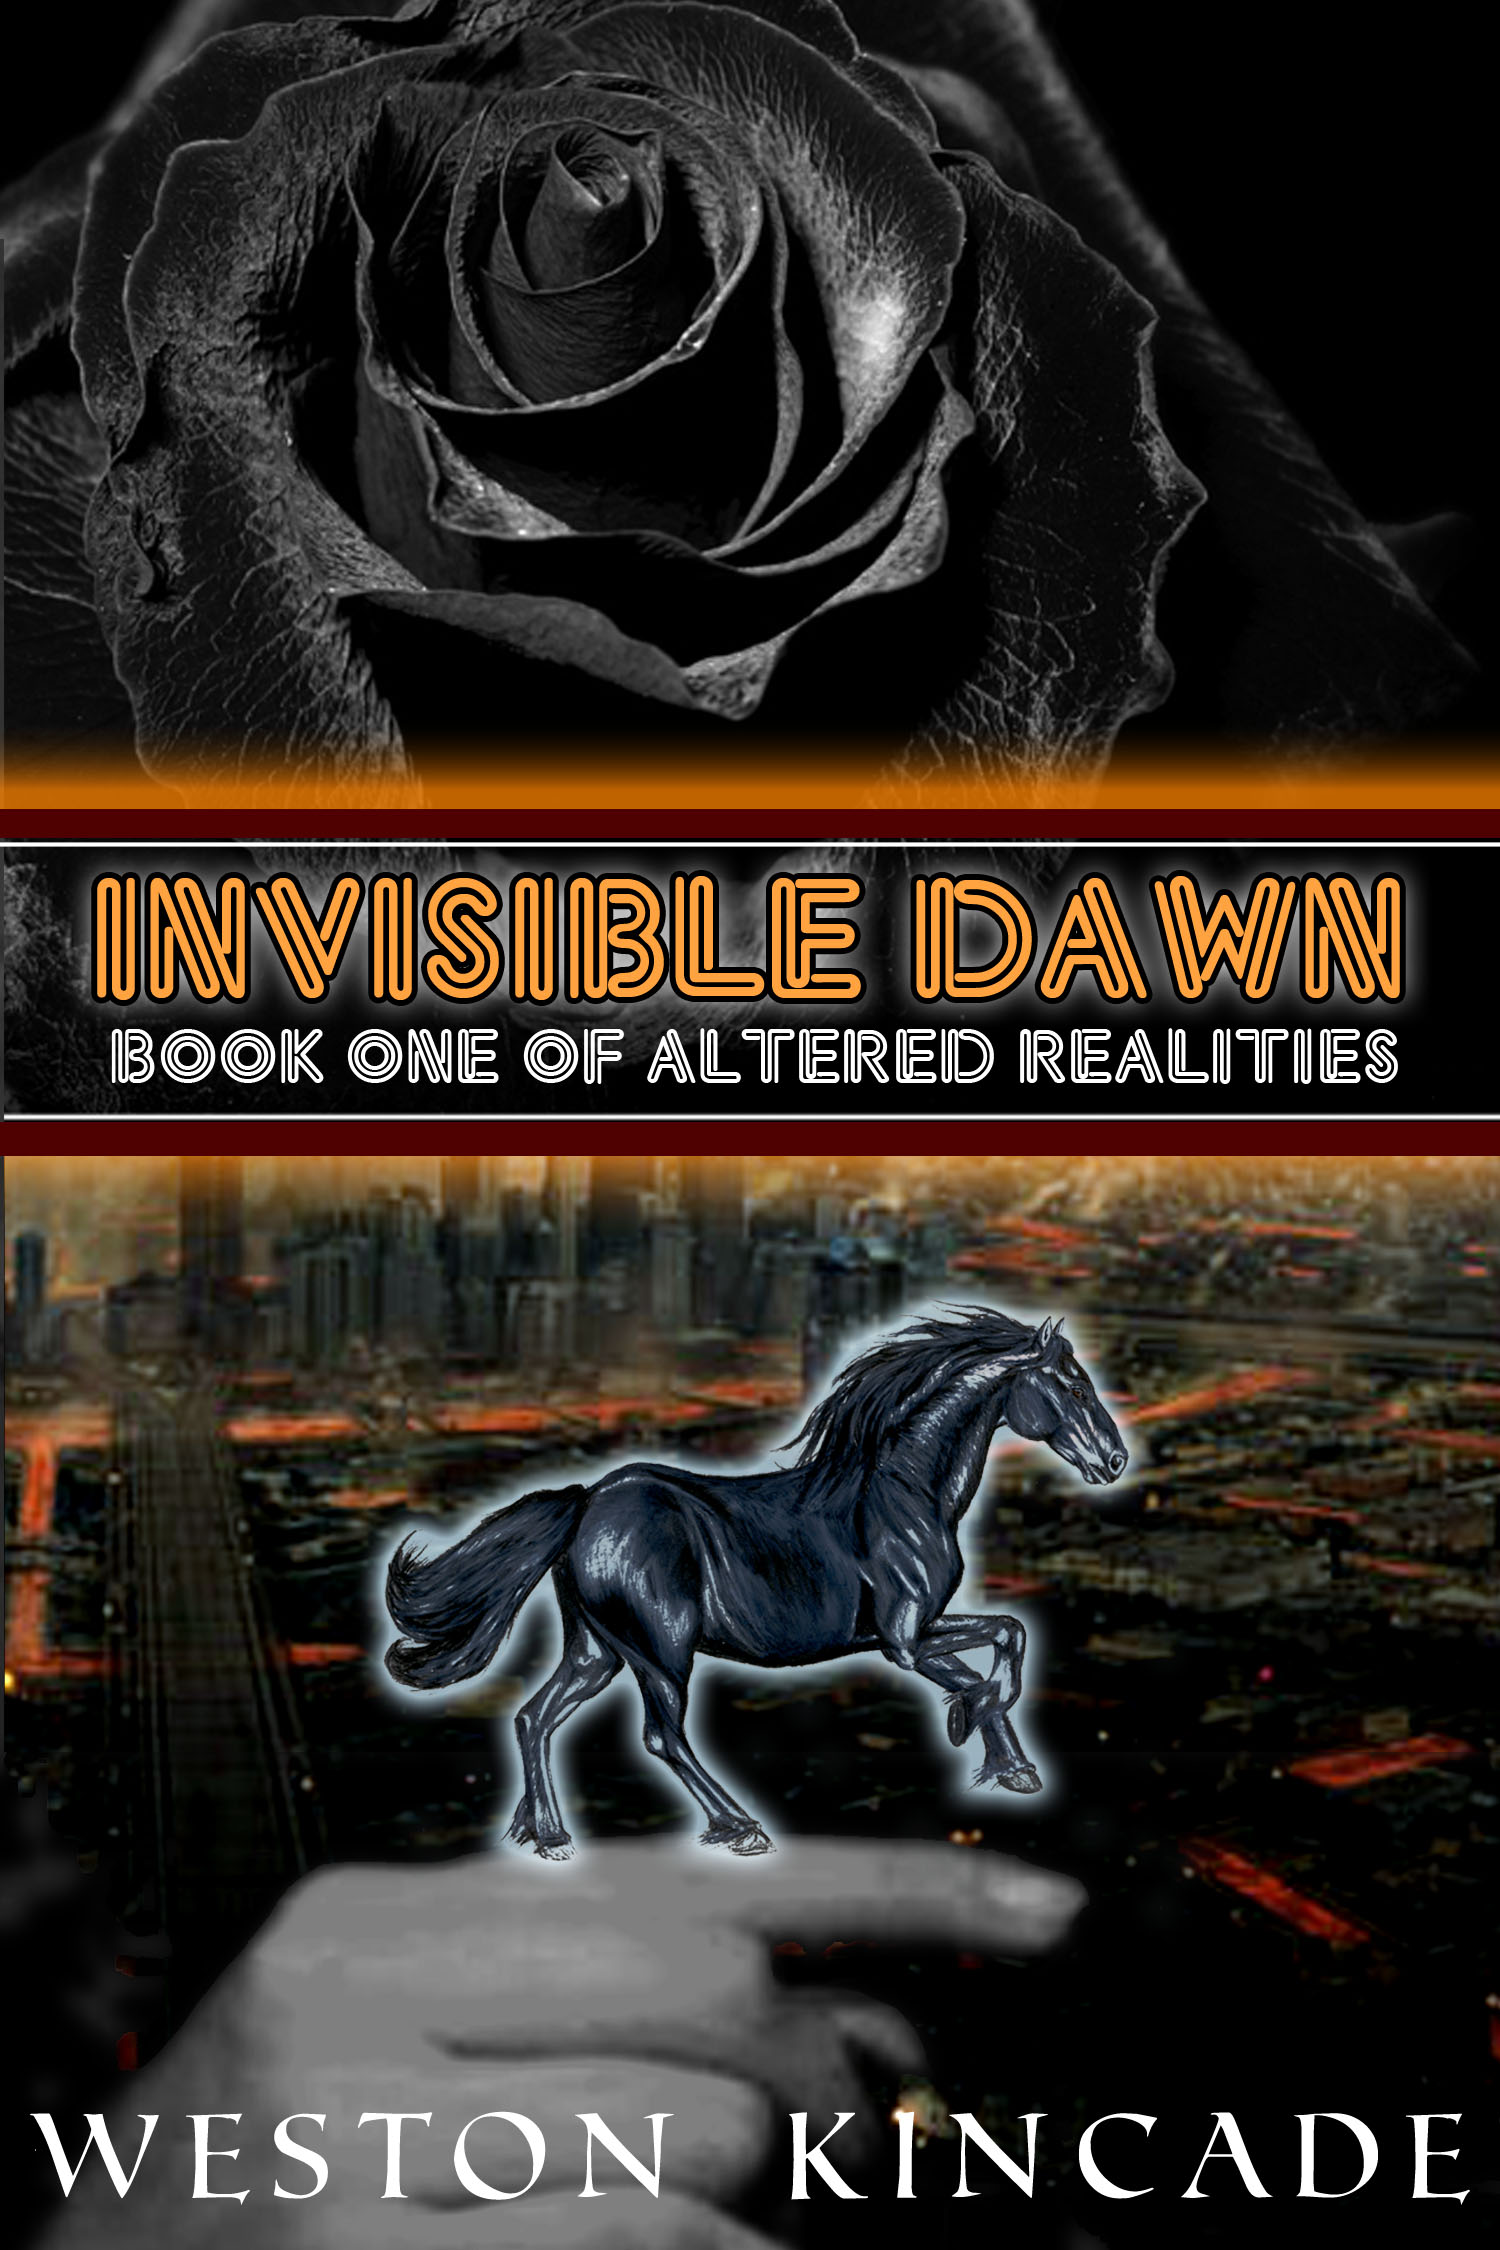 Invisible Dawn: Book One of Altered Realities